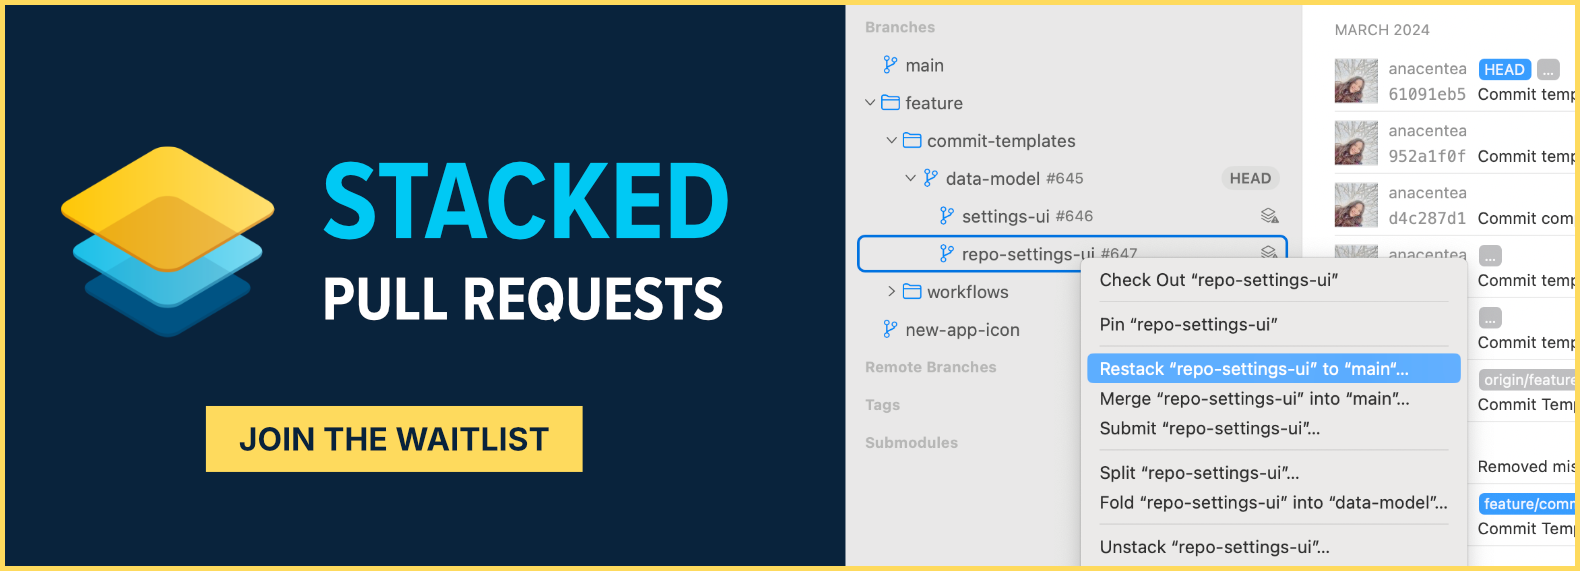 Tower's Stacked Pull Requests Waitlist